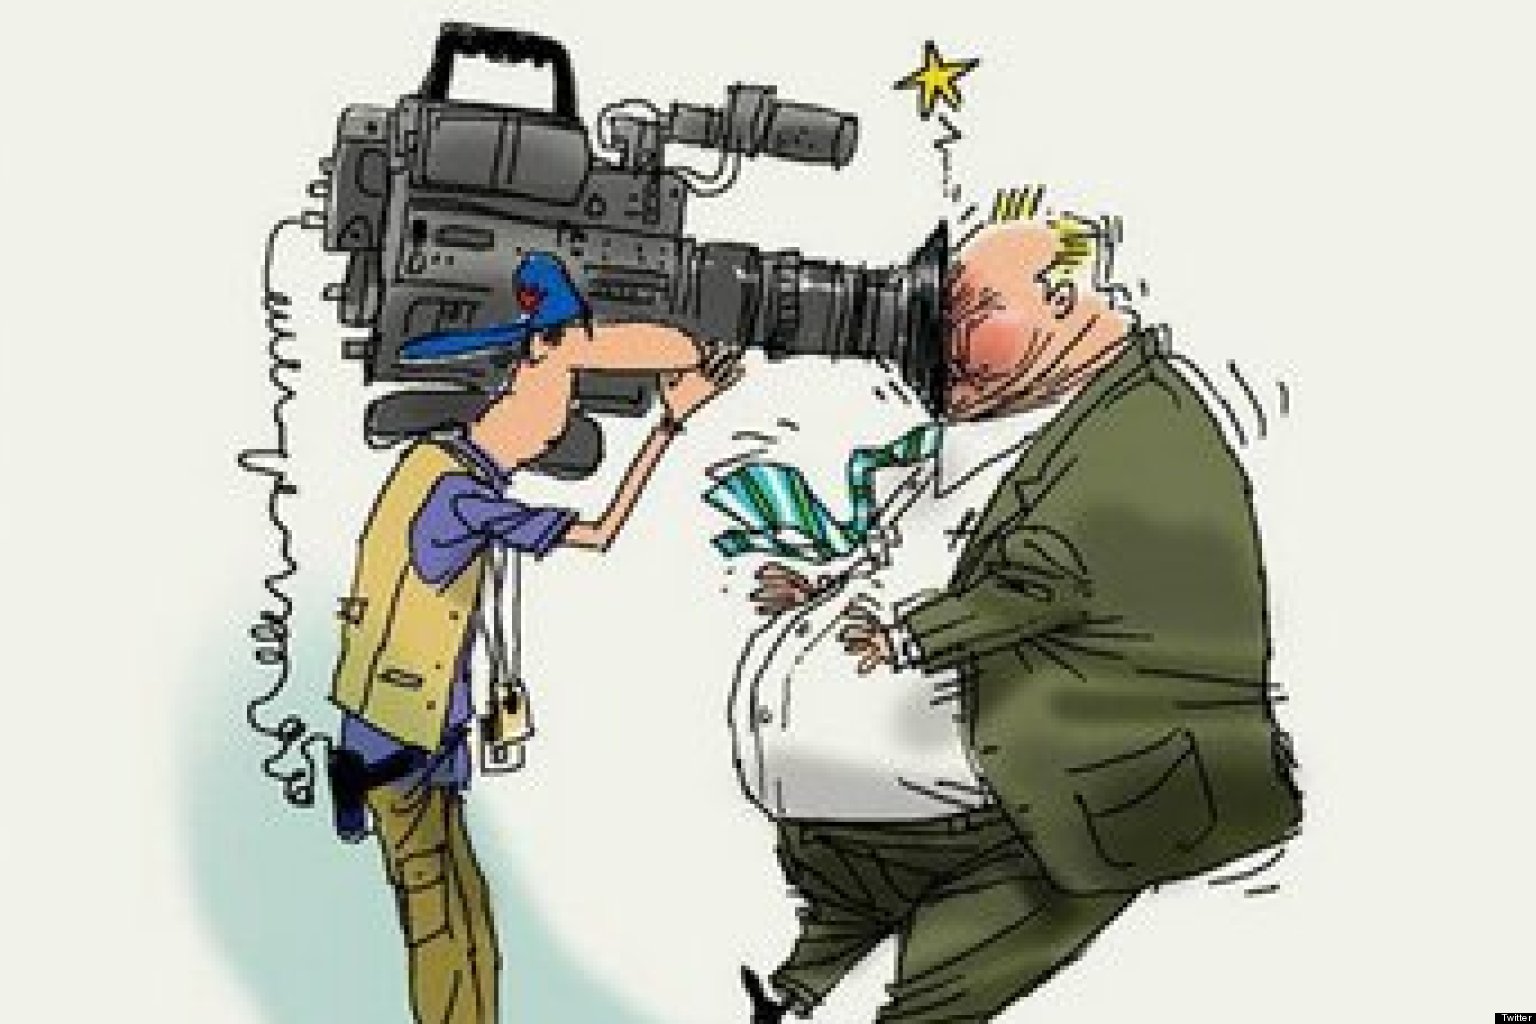 Rob ford and camera #1